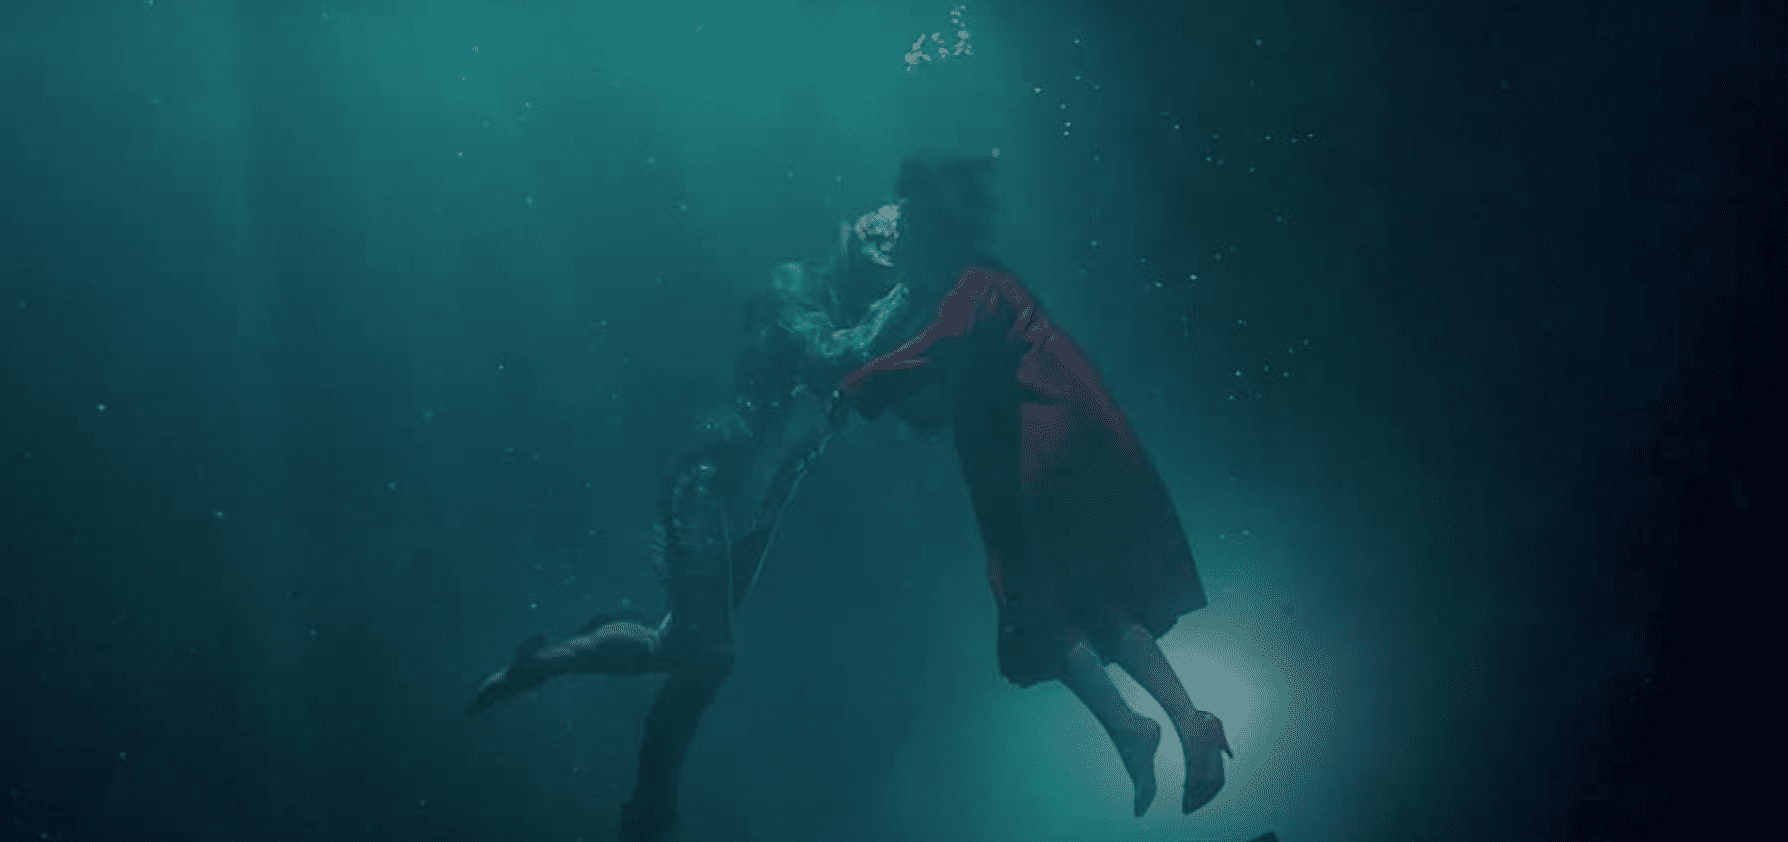 A woman and a sea creature embrace and share an underwater kiss